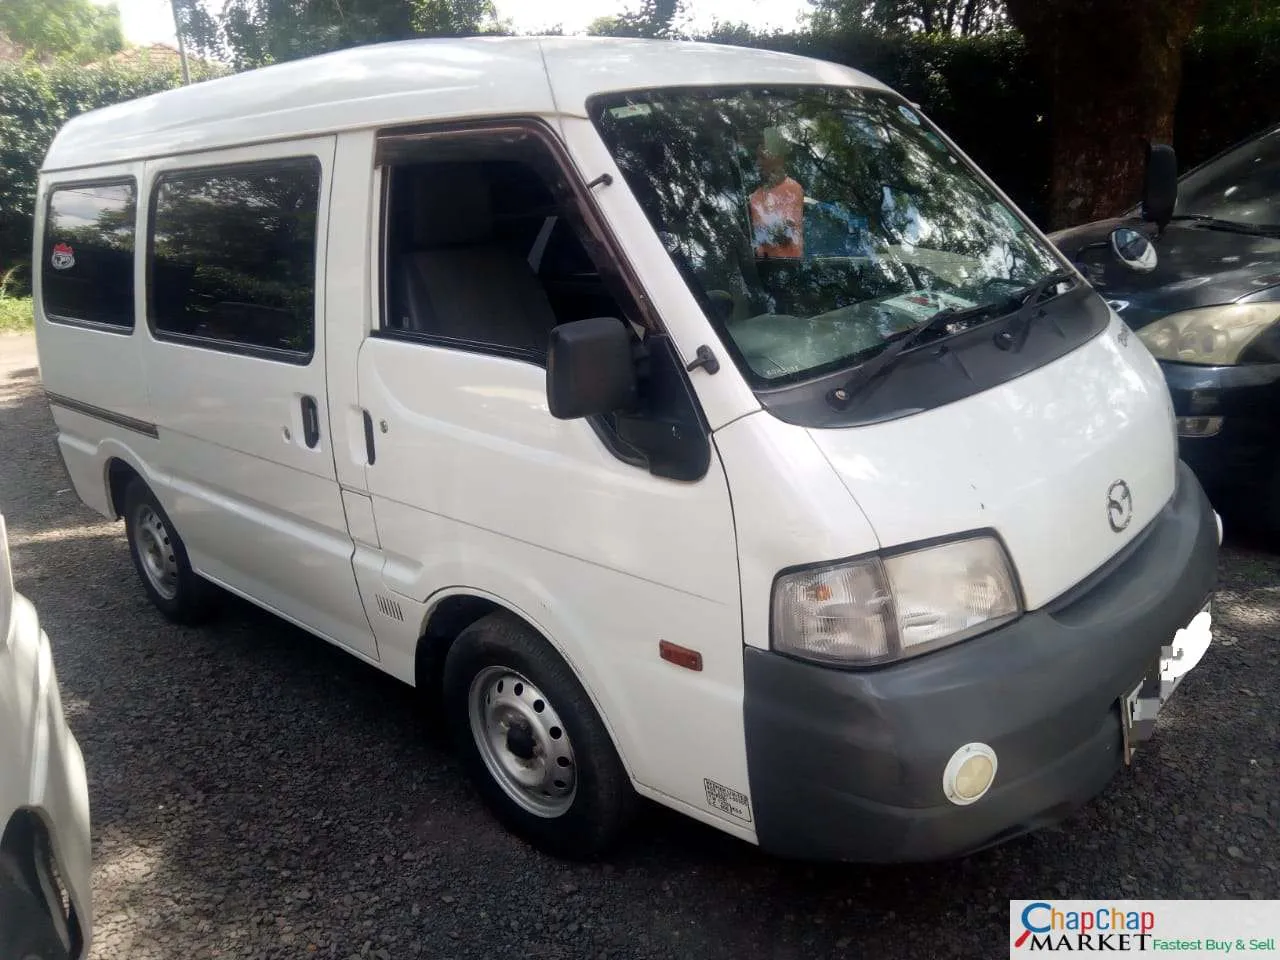 Mazda Bongo Van QUICKEST SALE You Pay 40% DEPOSIT hire purchase installments EXCLUSIVE TRADE IN OK HIRE PURCHASE INSTALLMENTS Kenya